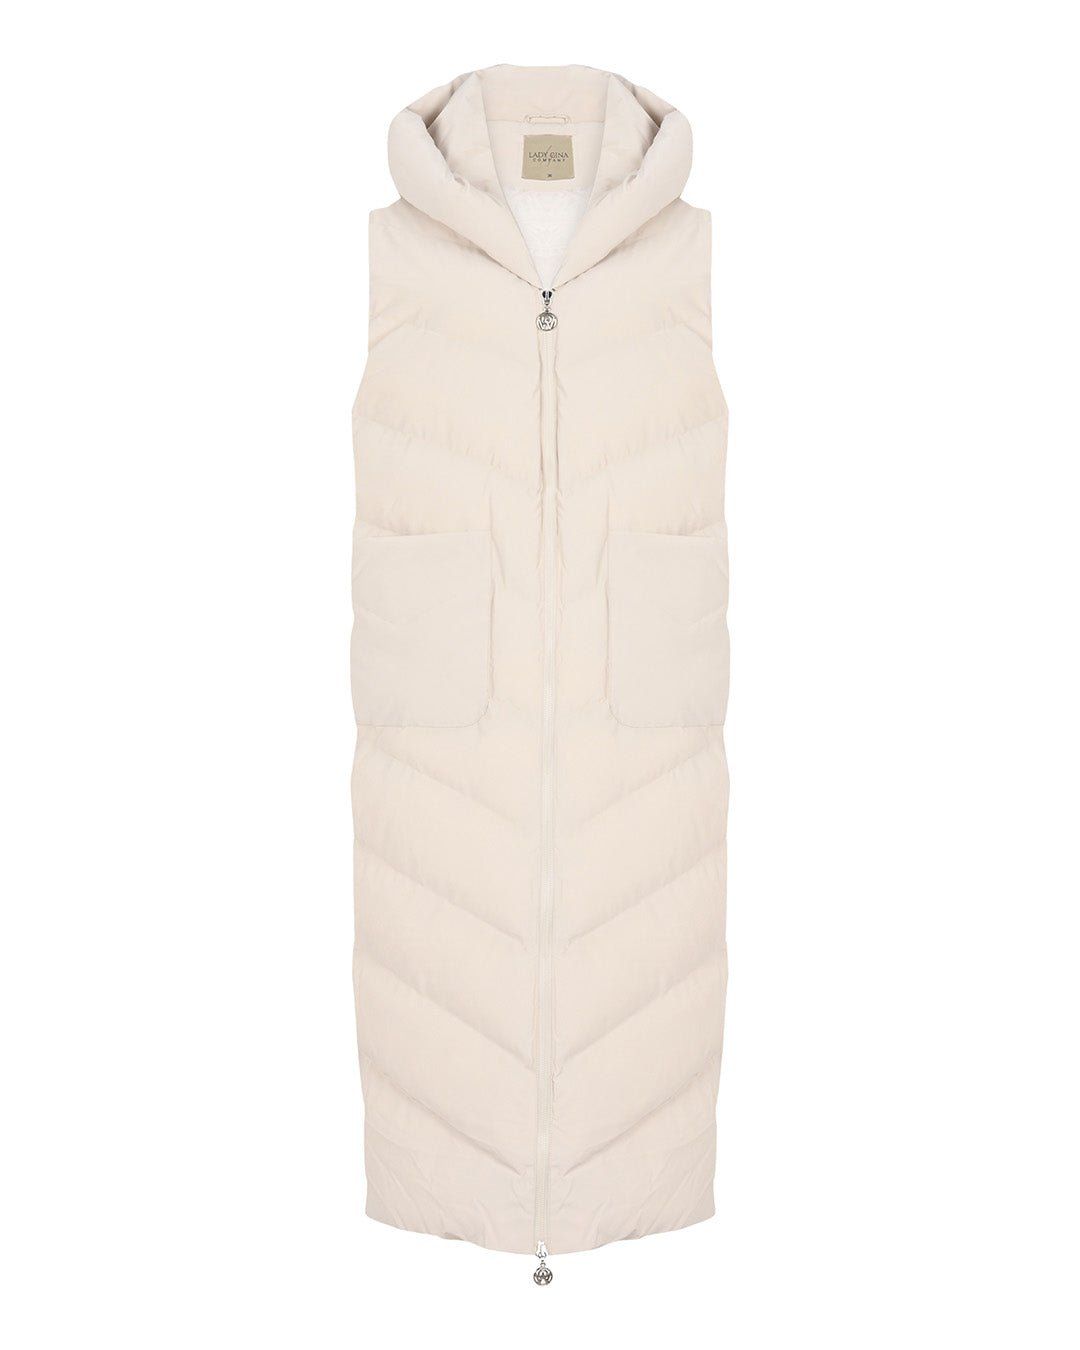 Hooded Long Puffer Vest with Zipper on the Front